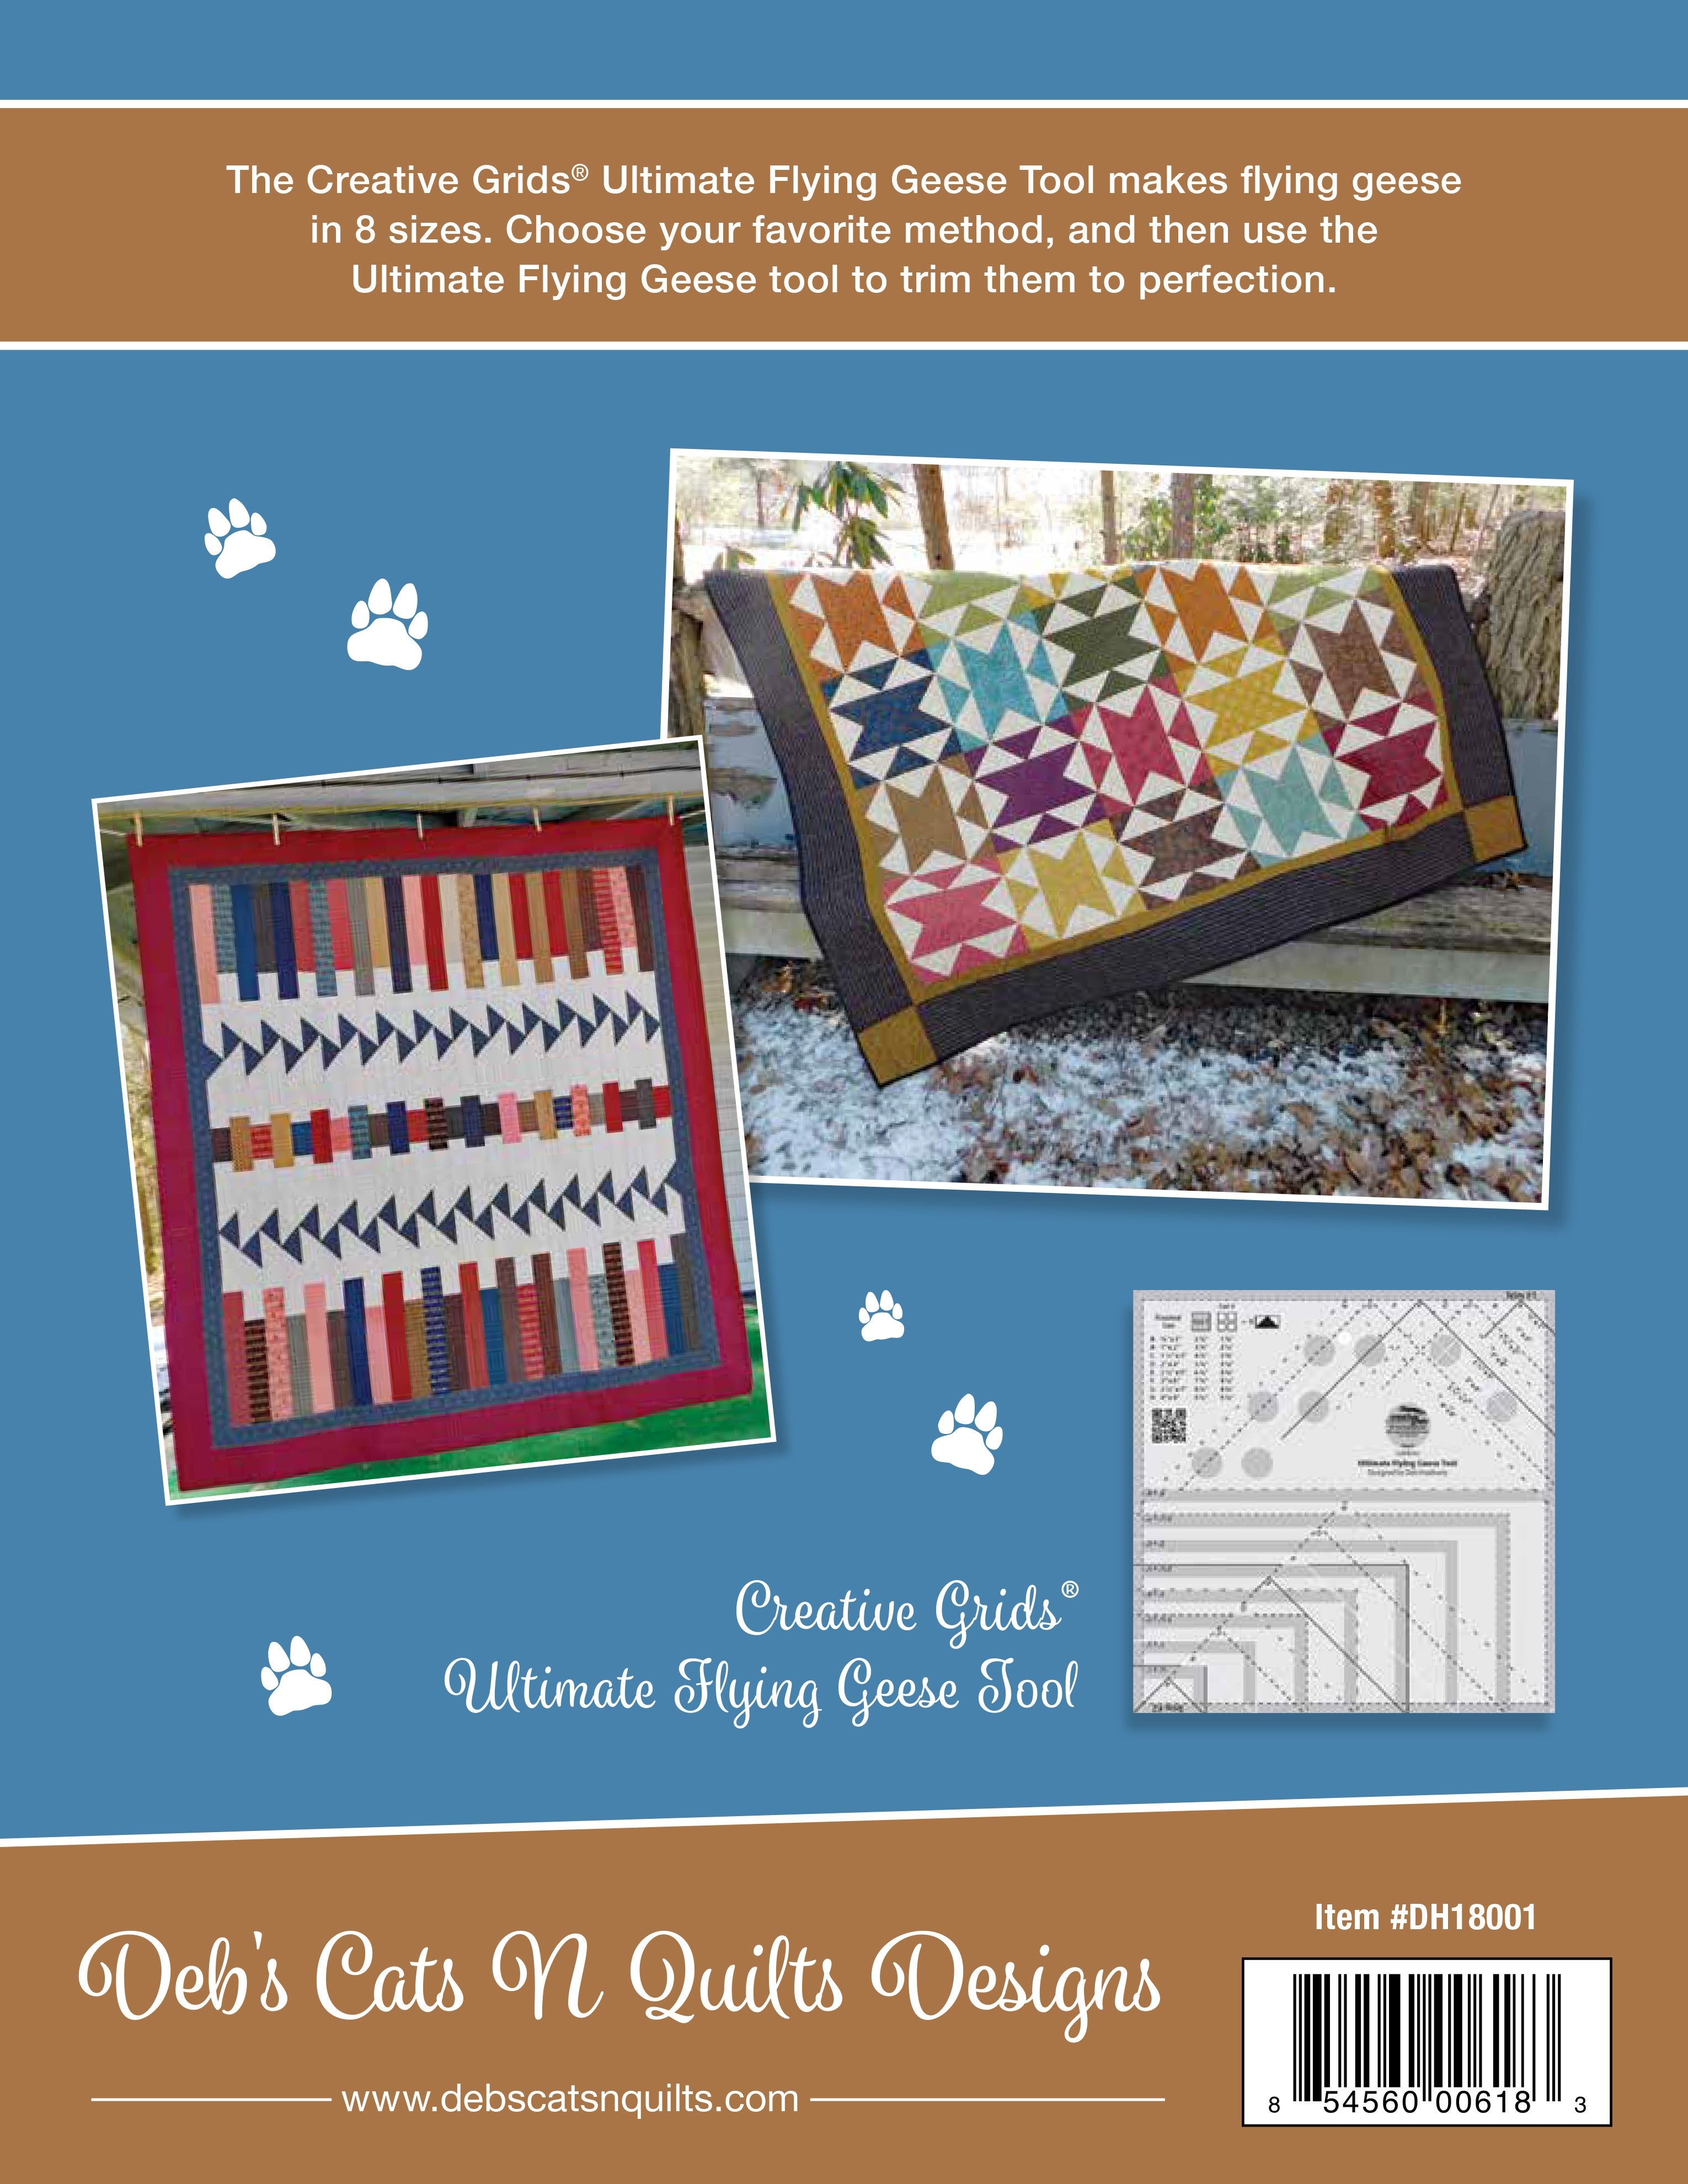 The Ultimate Flying Geese Quilt Pattern Book by Deb Heatherly of Deb's Cats N Quilts